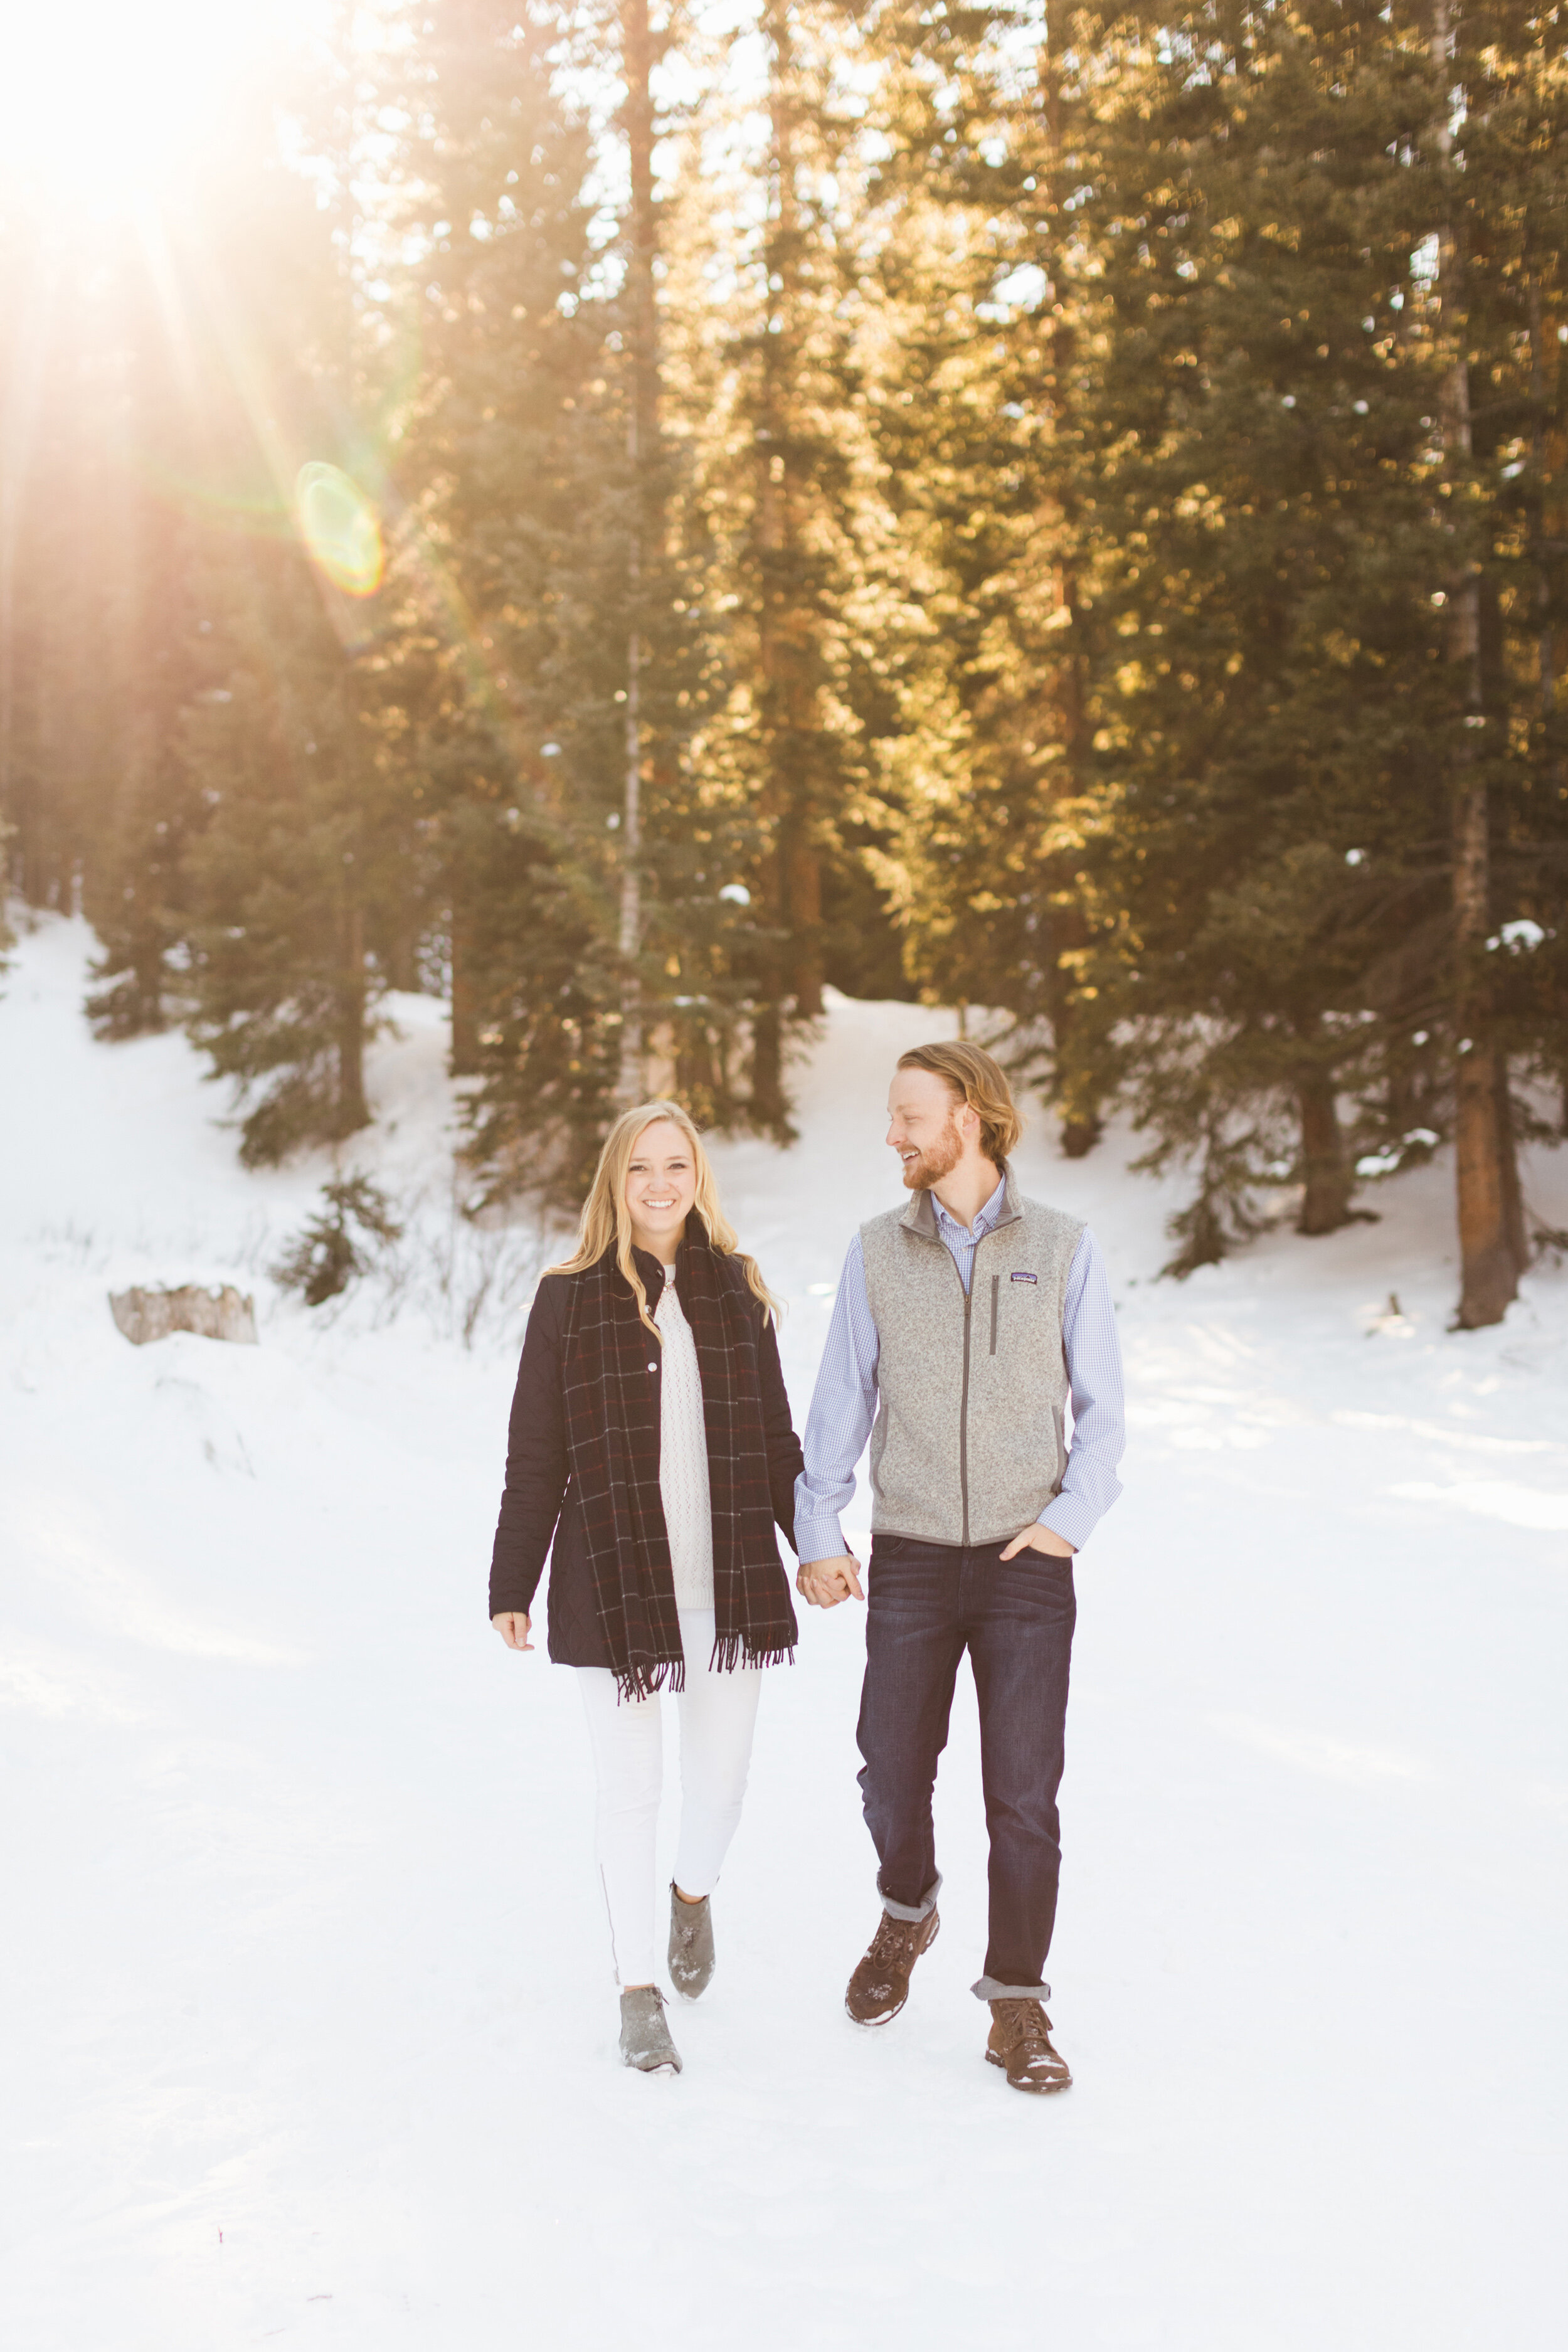 snowy-colorado-engagement-photos-in-the-forest-by-jackie-cooper-photo-06.jpg